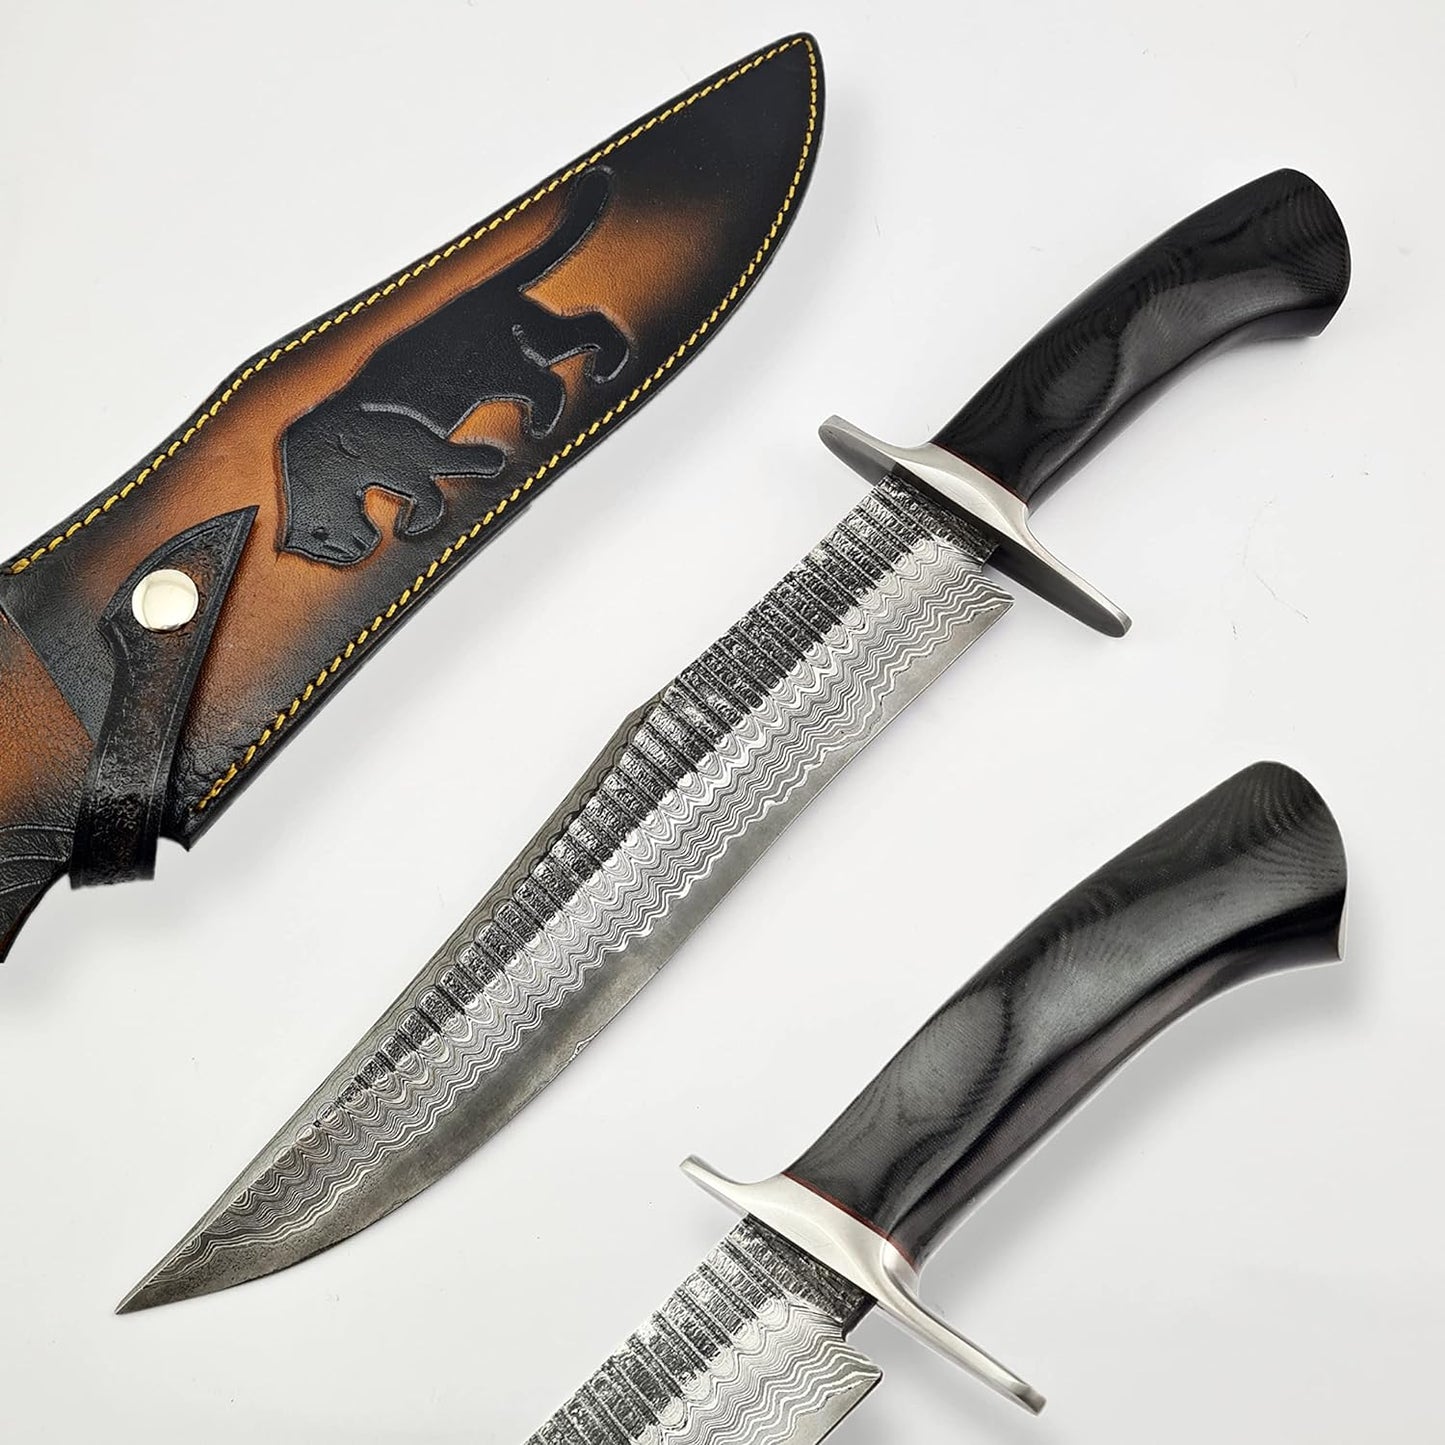 KD Damascus Steel Hunting Knife with Leather Sheath & Gift Box